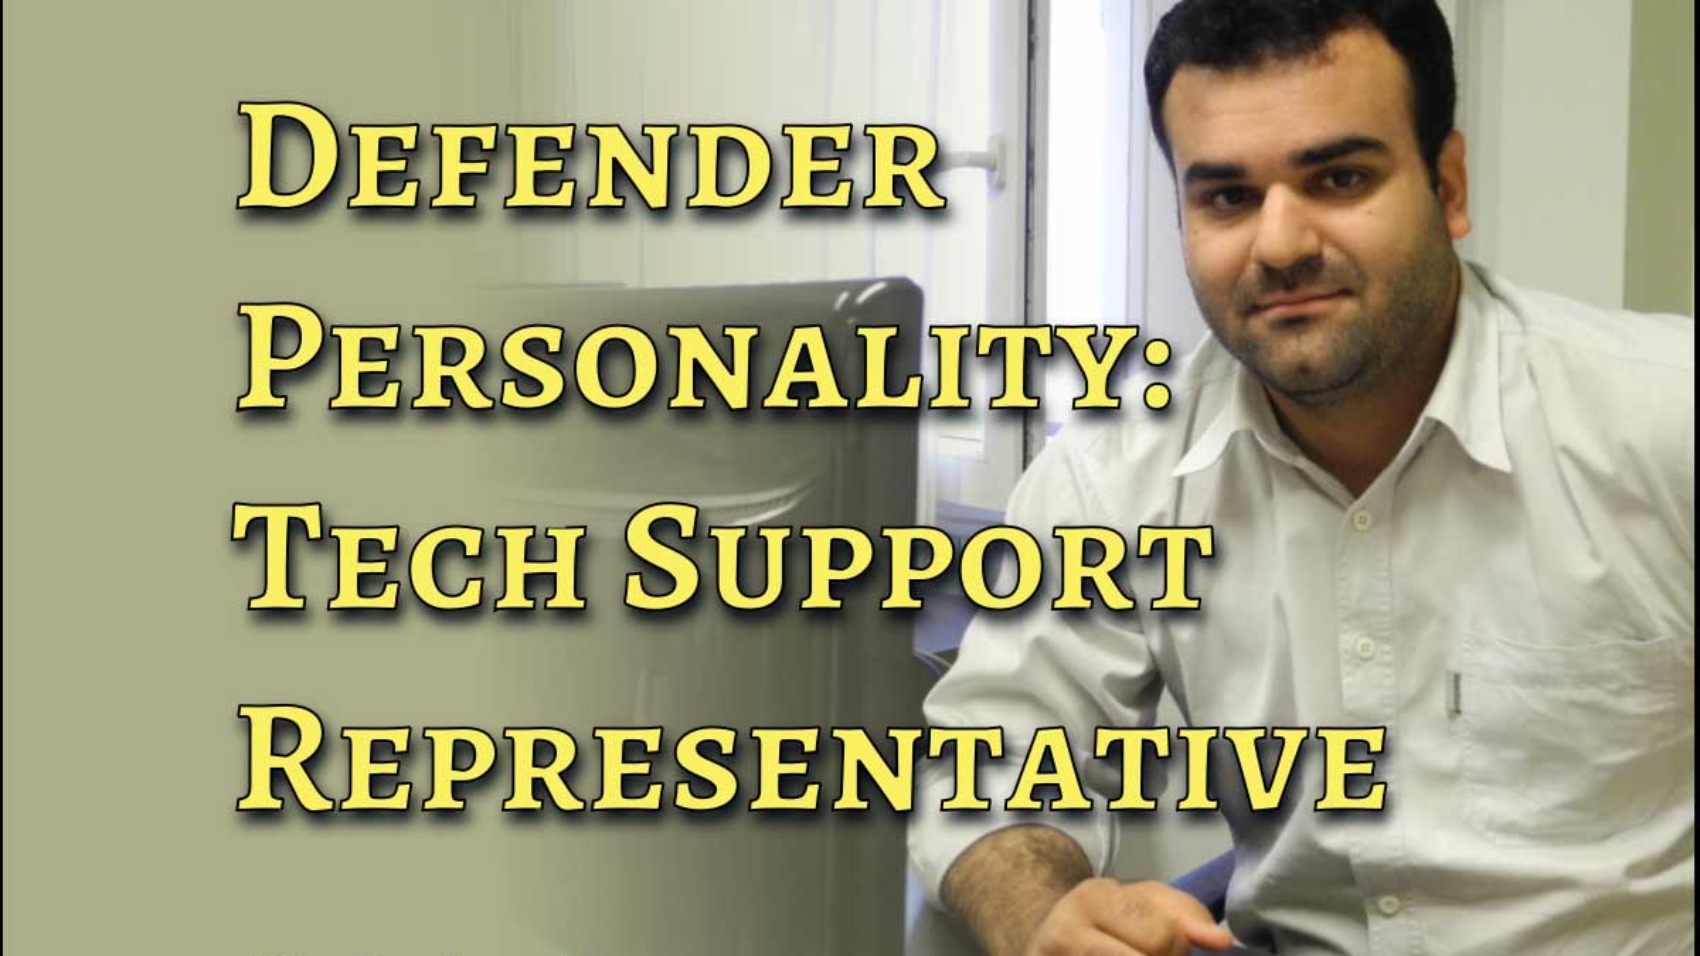 Rouhollah Salemi Cadmix Magazine Article Defender Personality Type Teh Support Representative